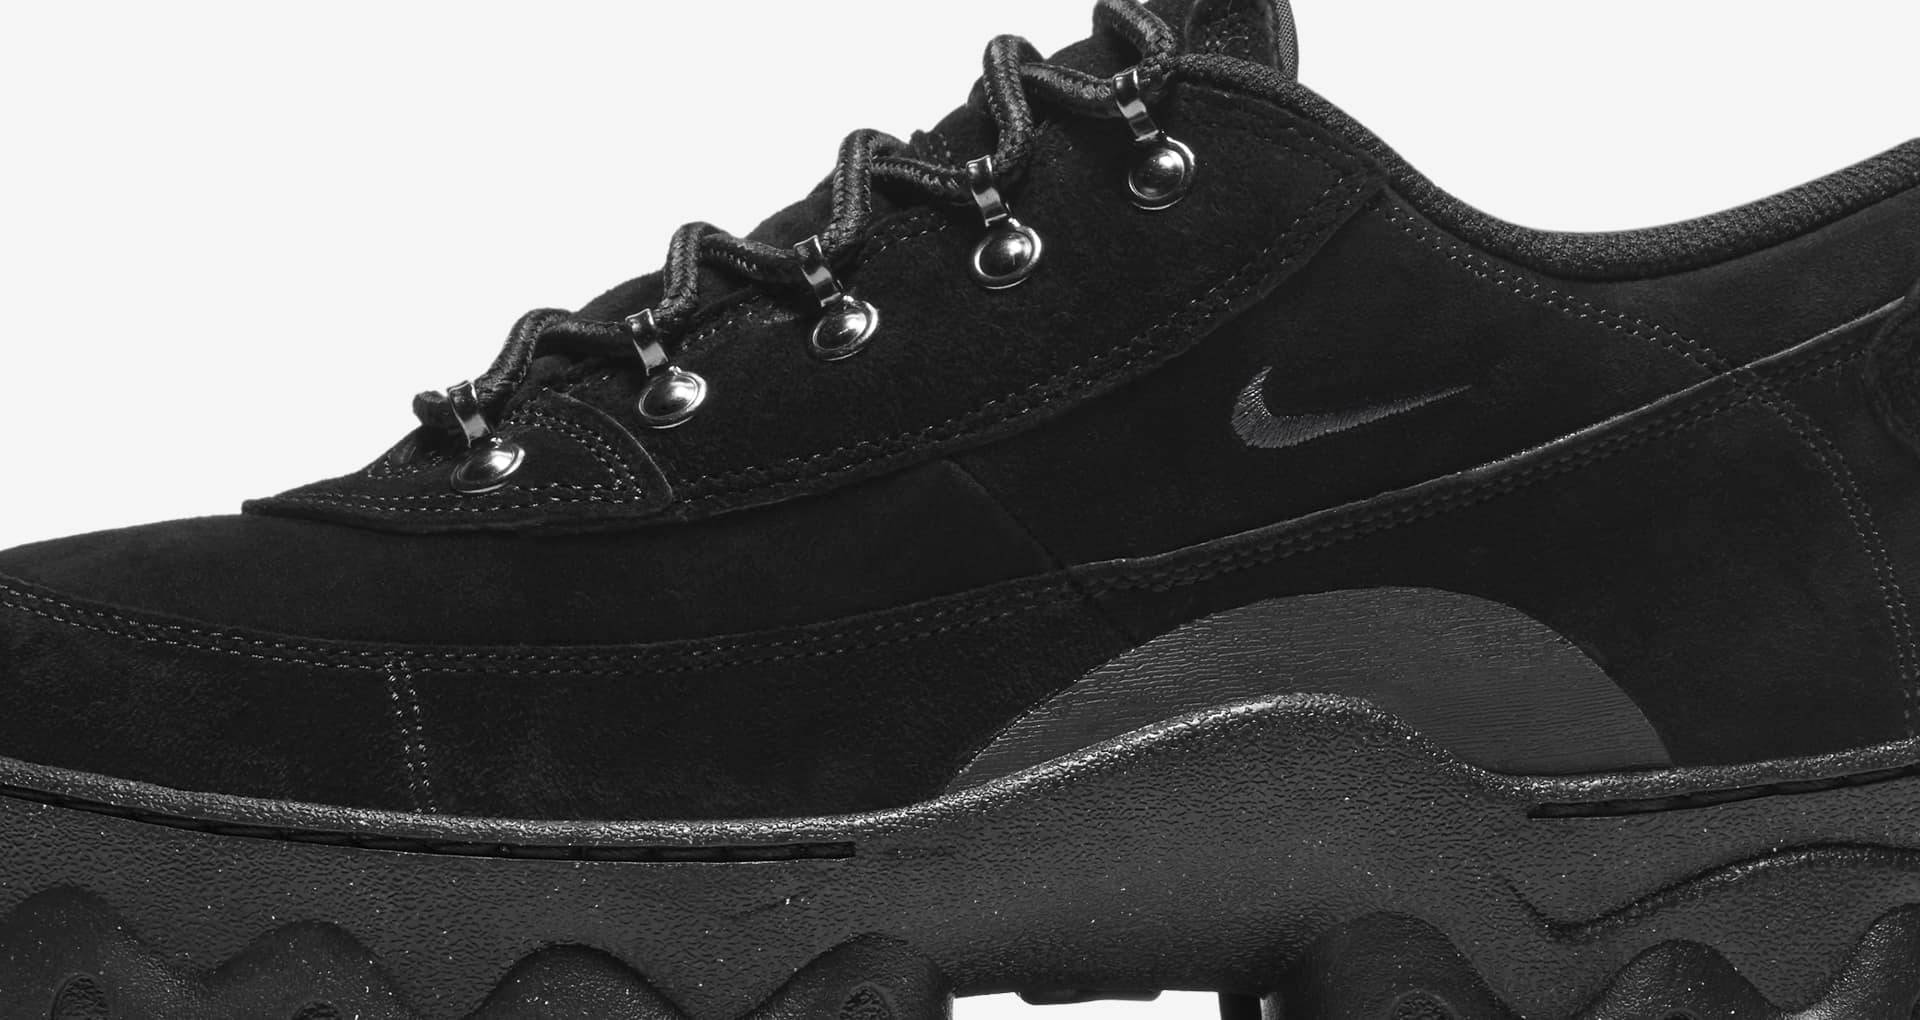 The Nike Lahar Low Is This Season's Must-Have Shoe Set To Drop In